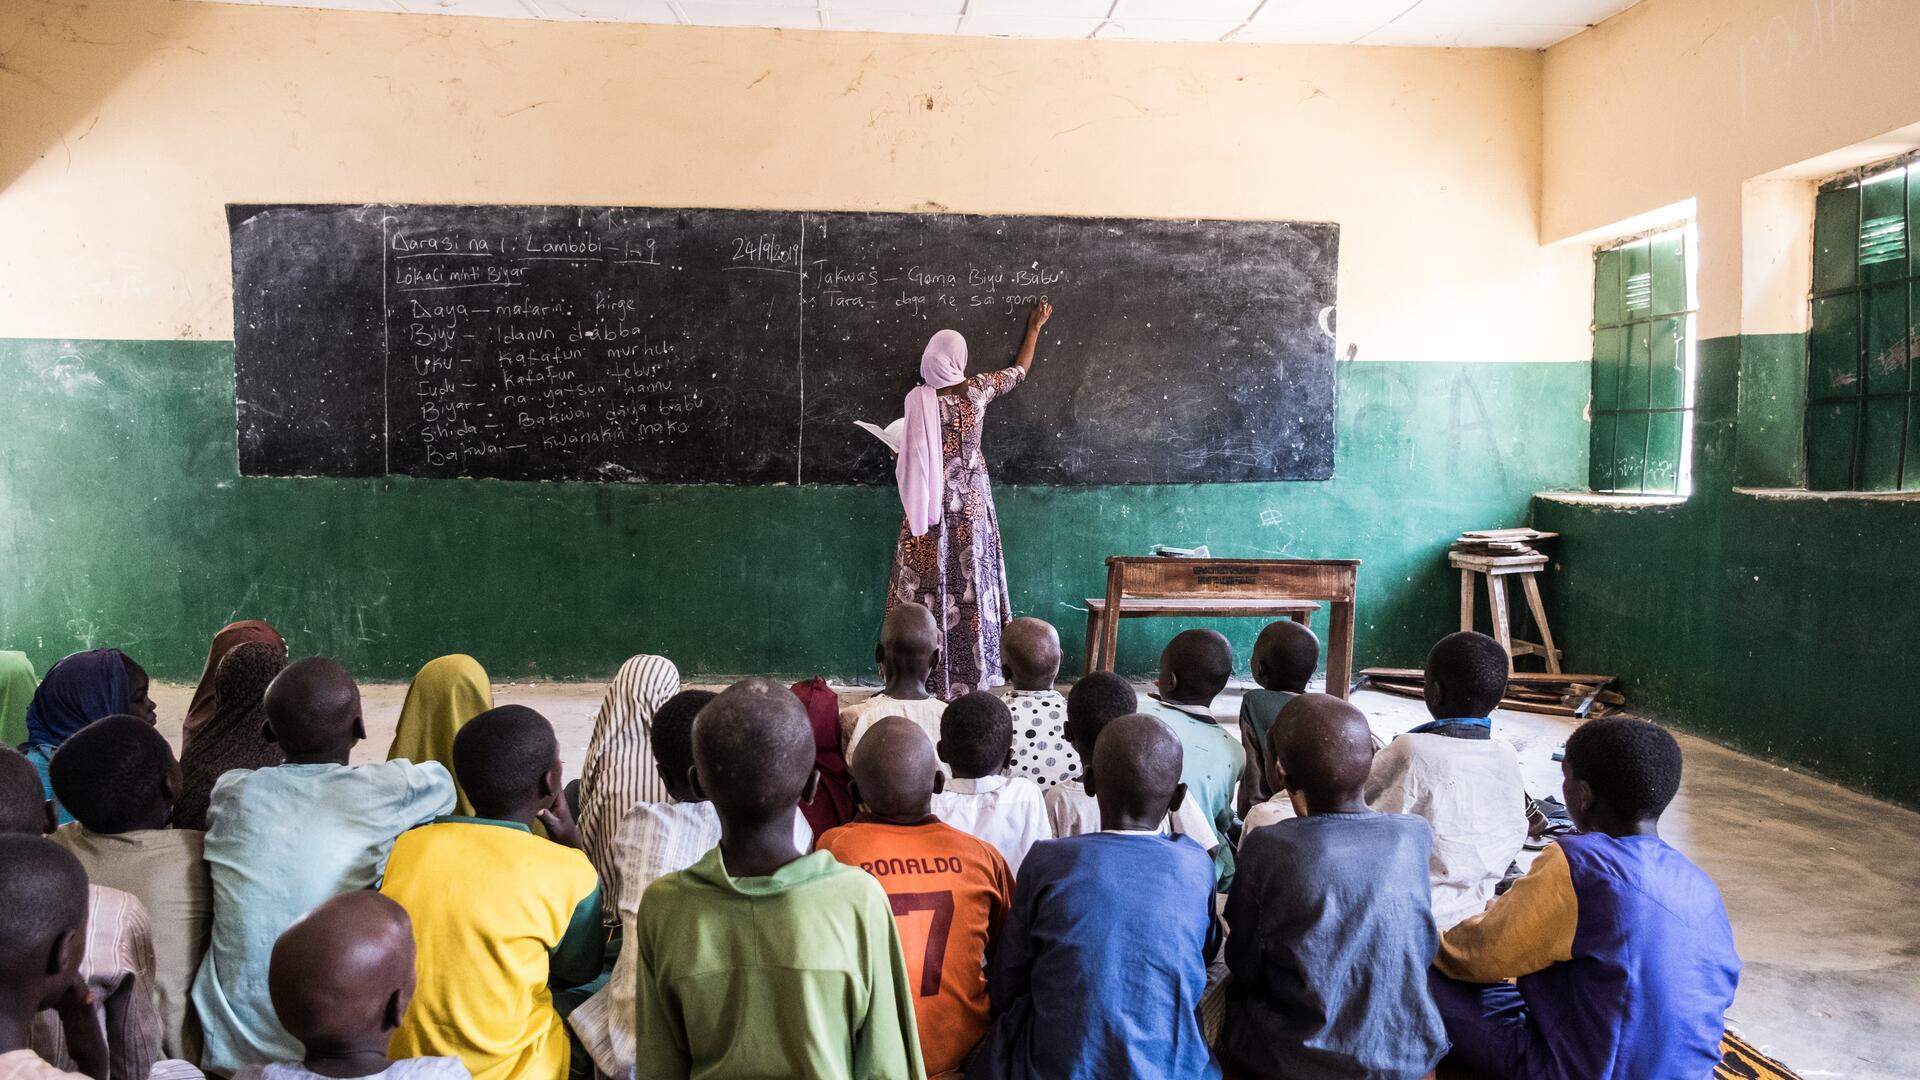 International Rescue Committee teacher Fatima writes on a blackboard in the front of her classroom.